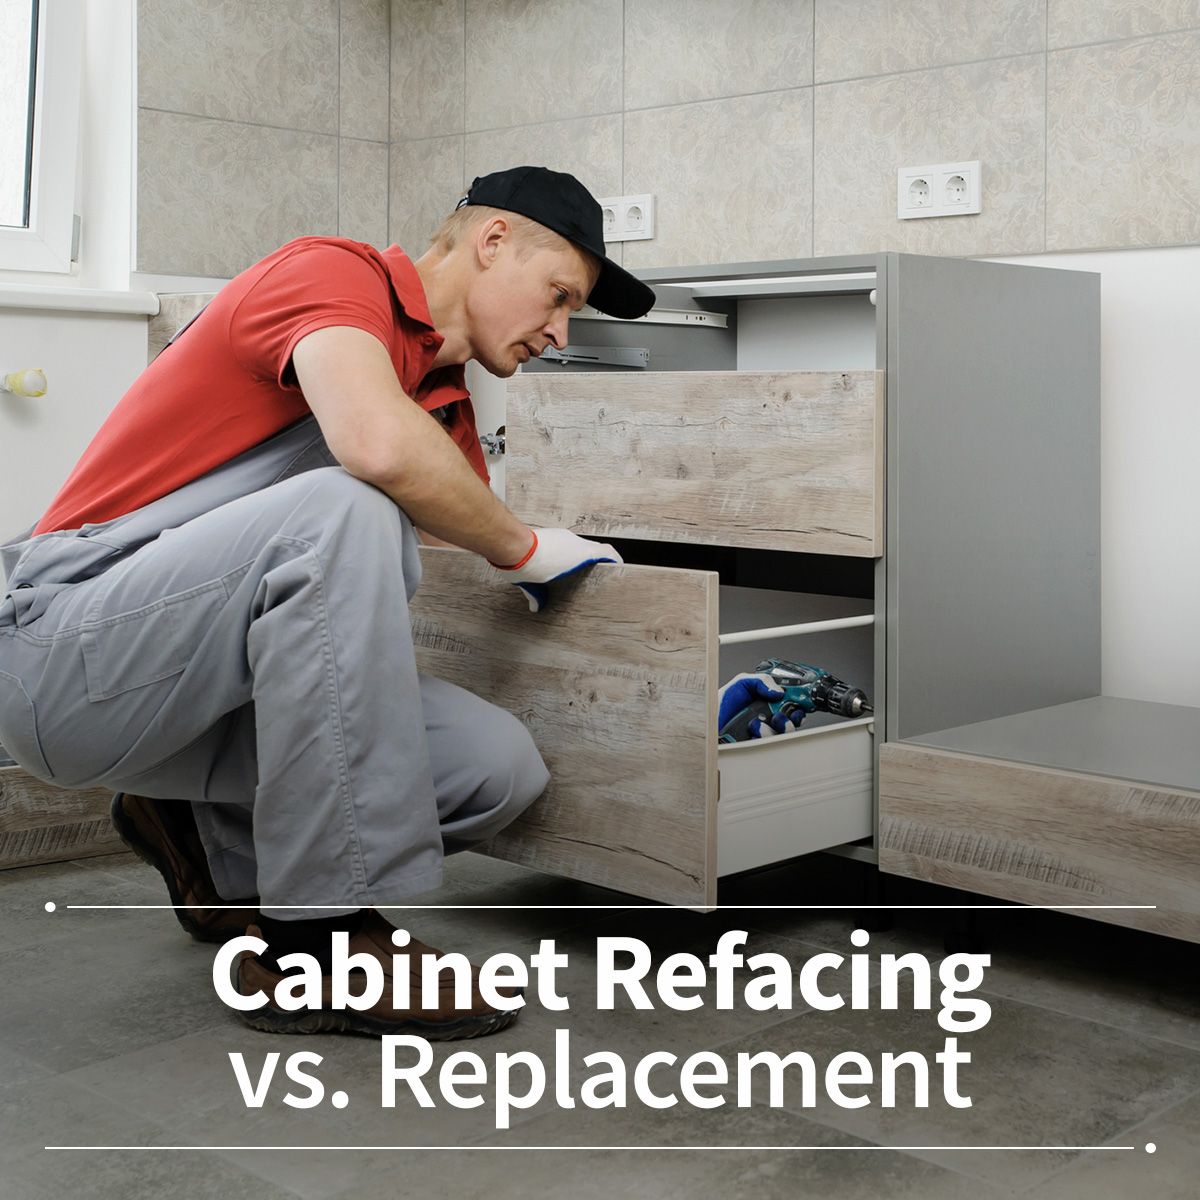 Cabinet Refacing vs. Replacement